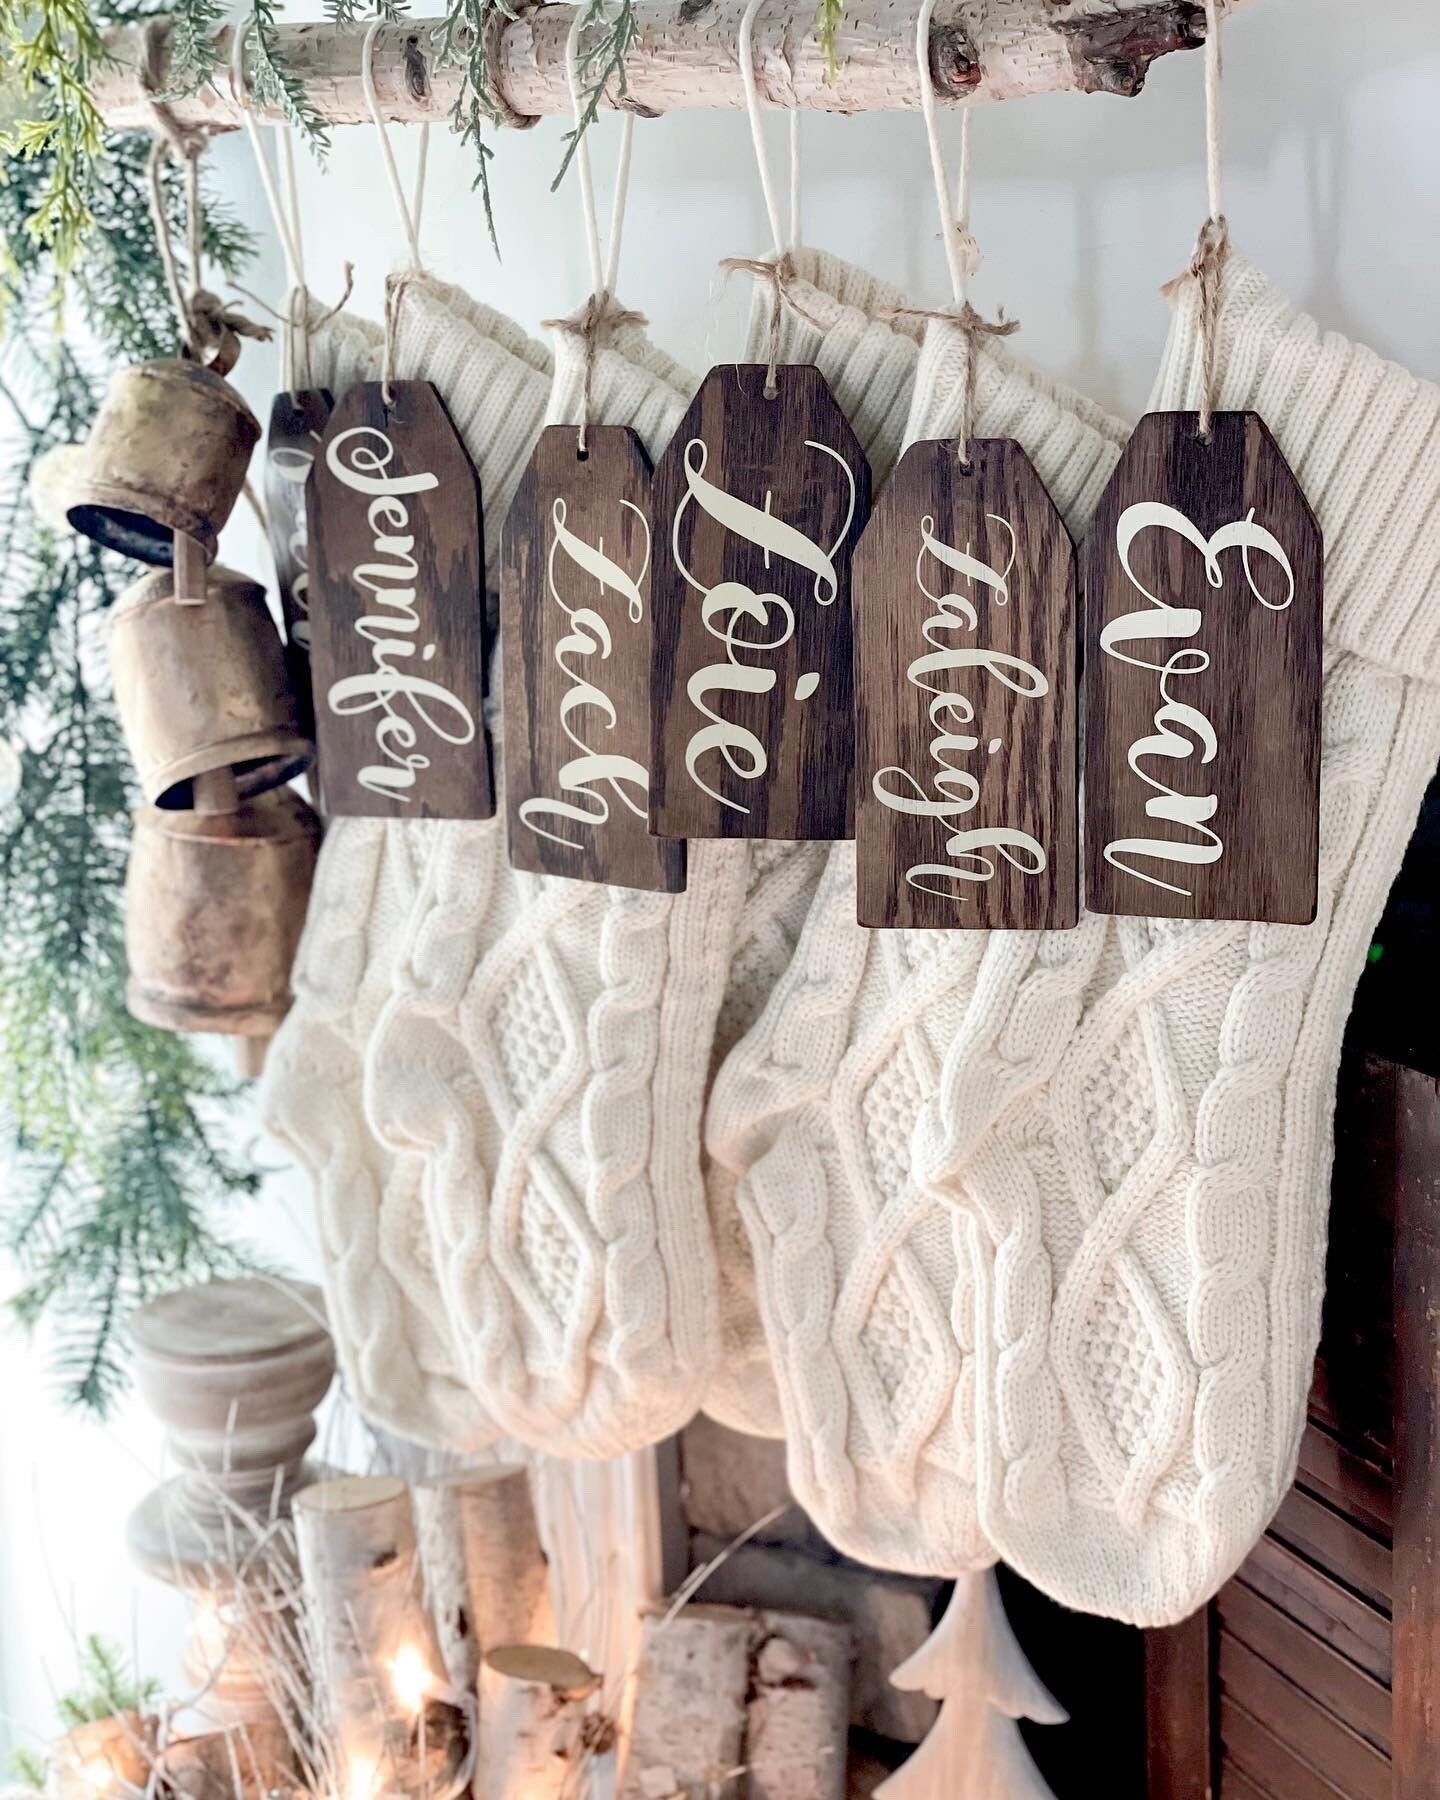 Personalized Hand Painted Wooden Stocking Name Tag